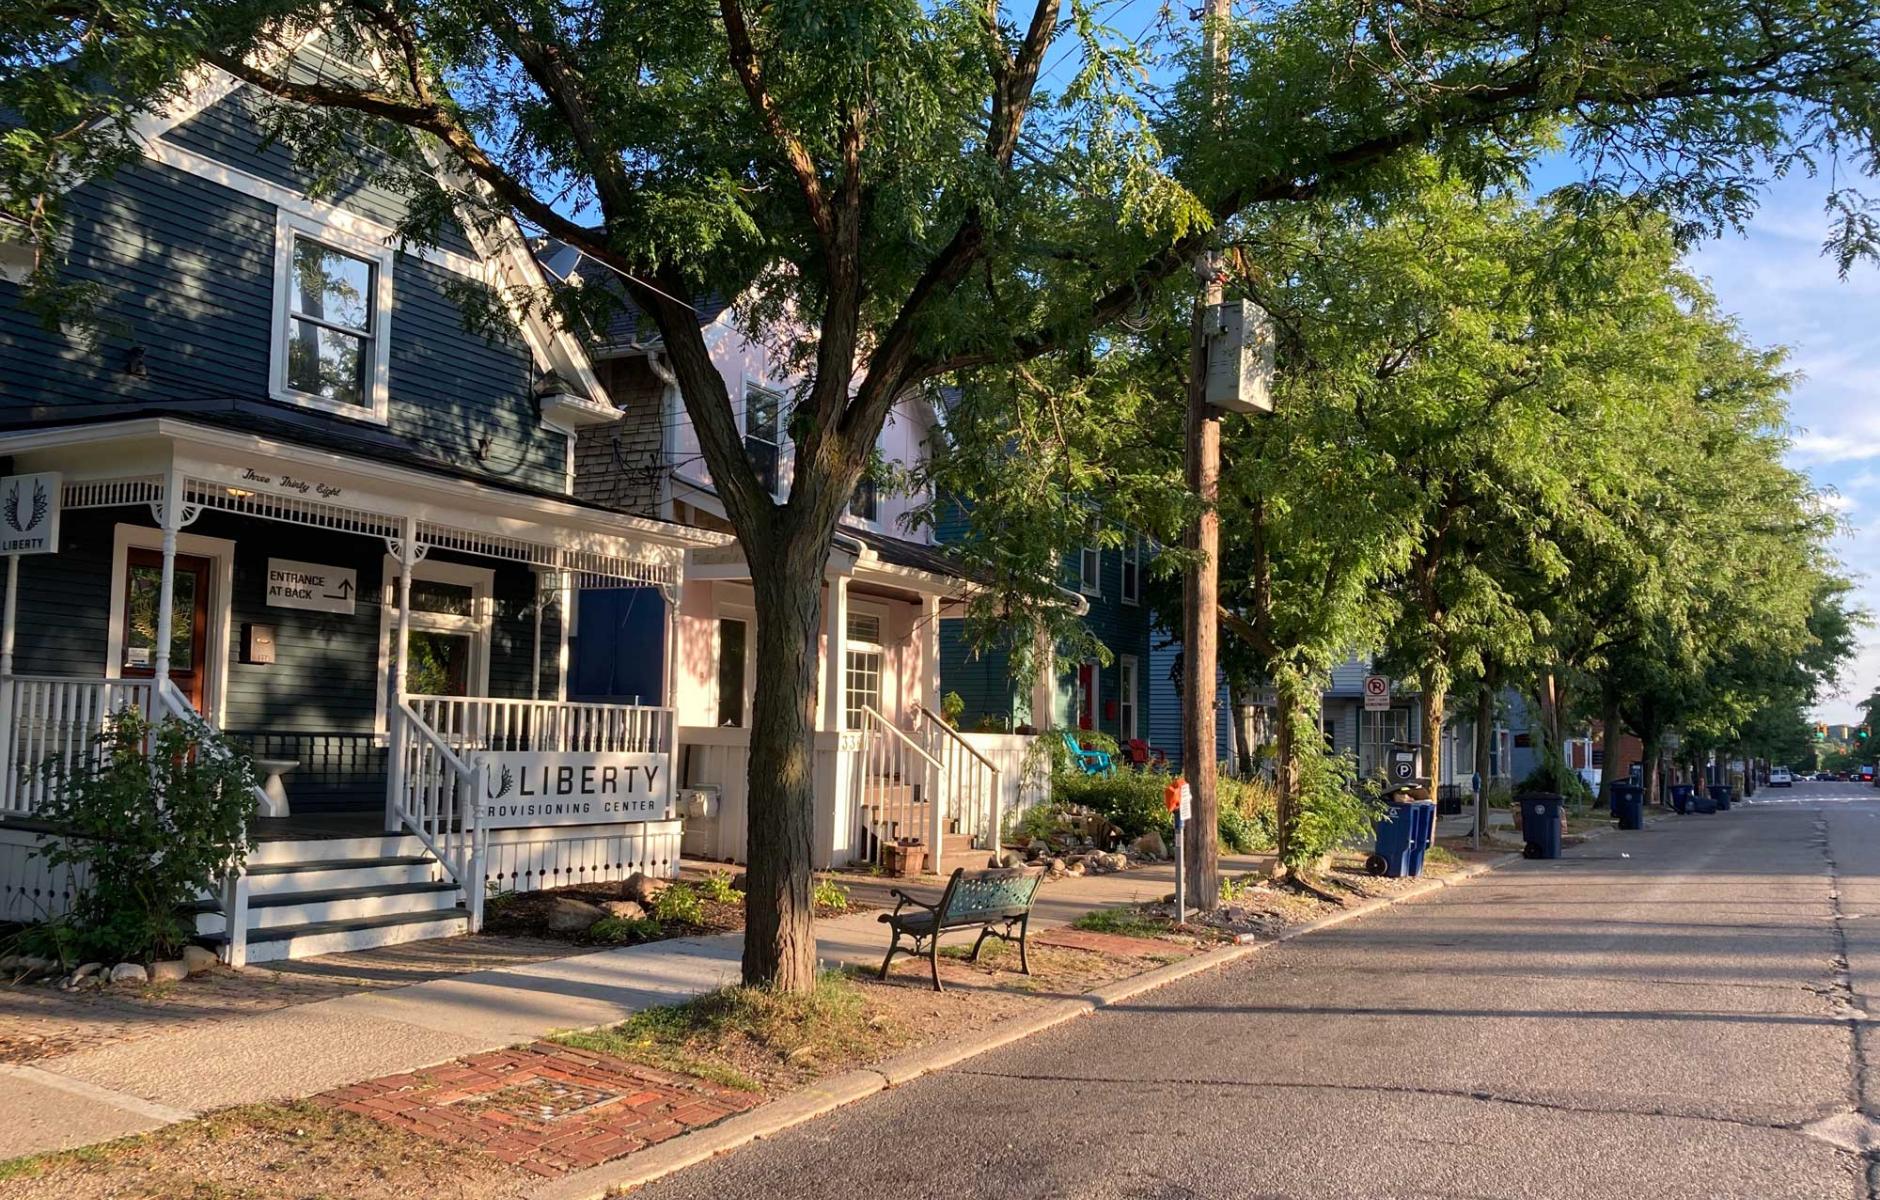 What Makes A Street Into A Neighborhood?